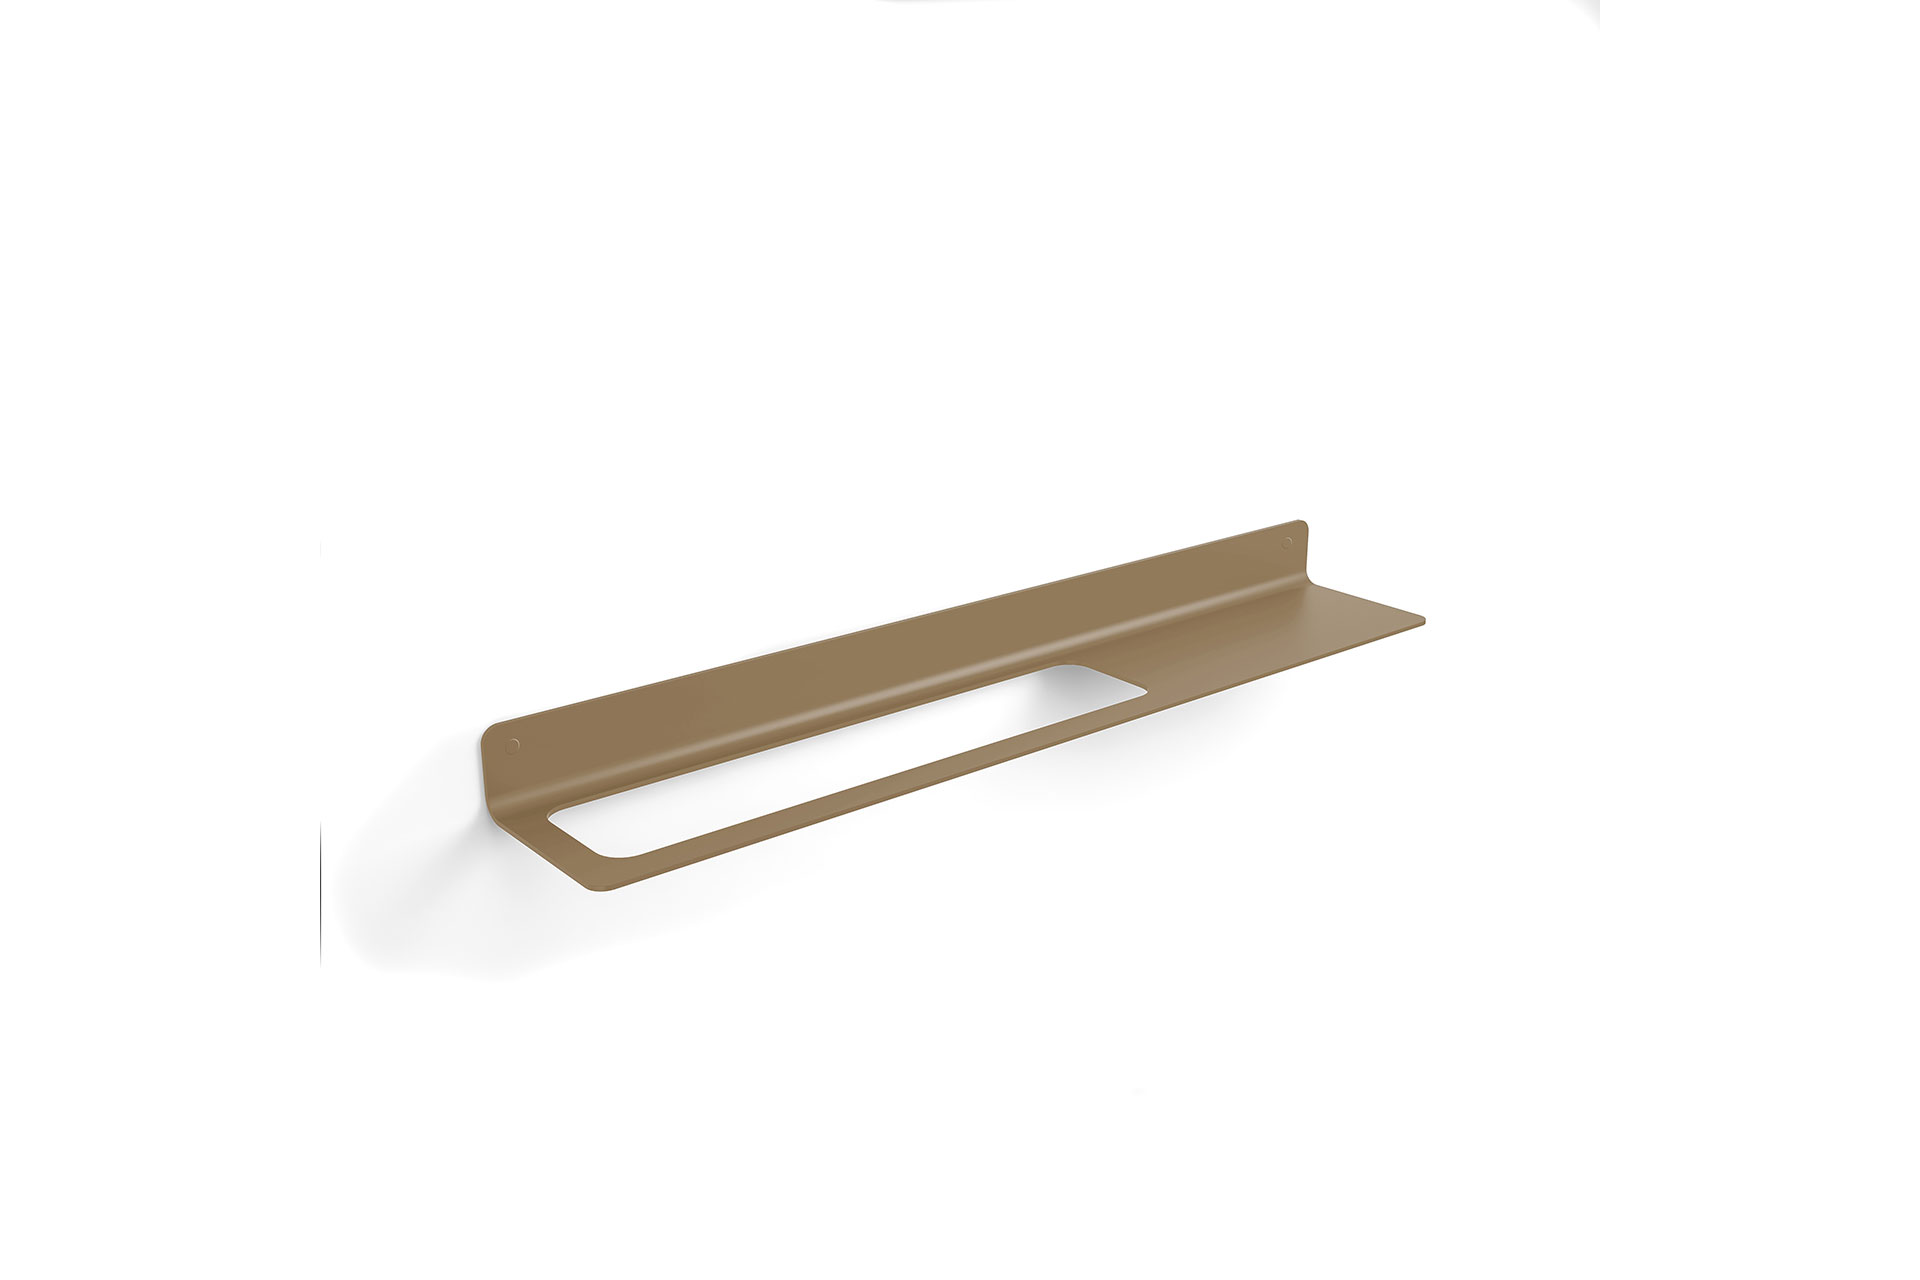 Towel holder and accessories bar 634 mm, left hole